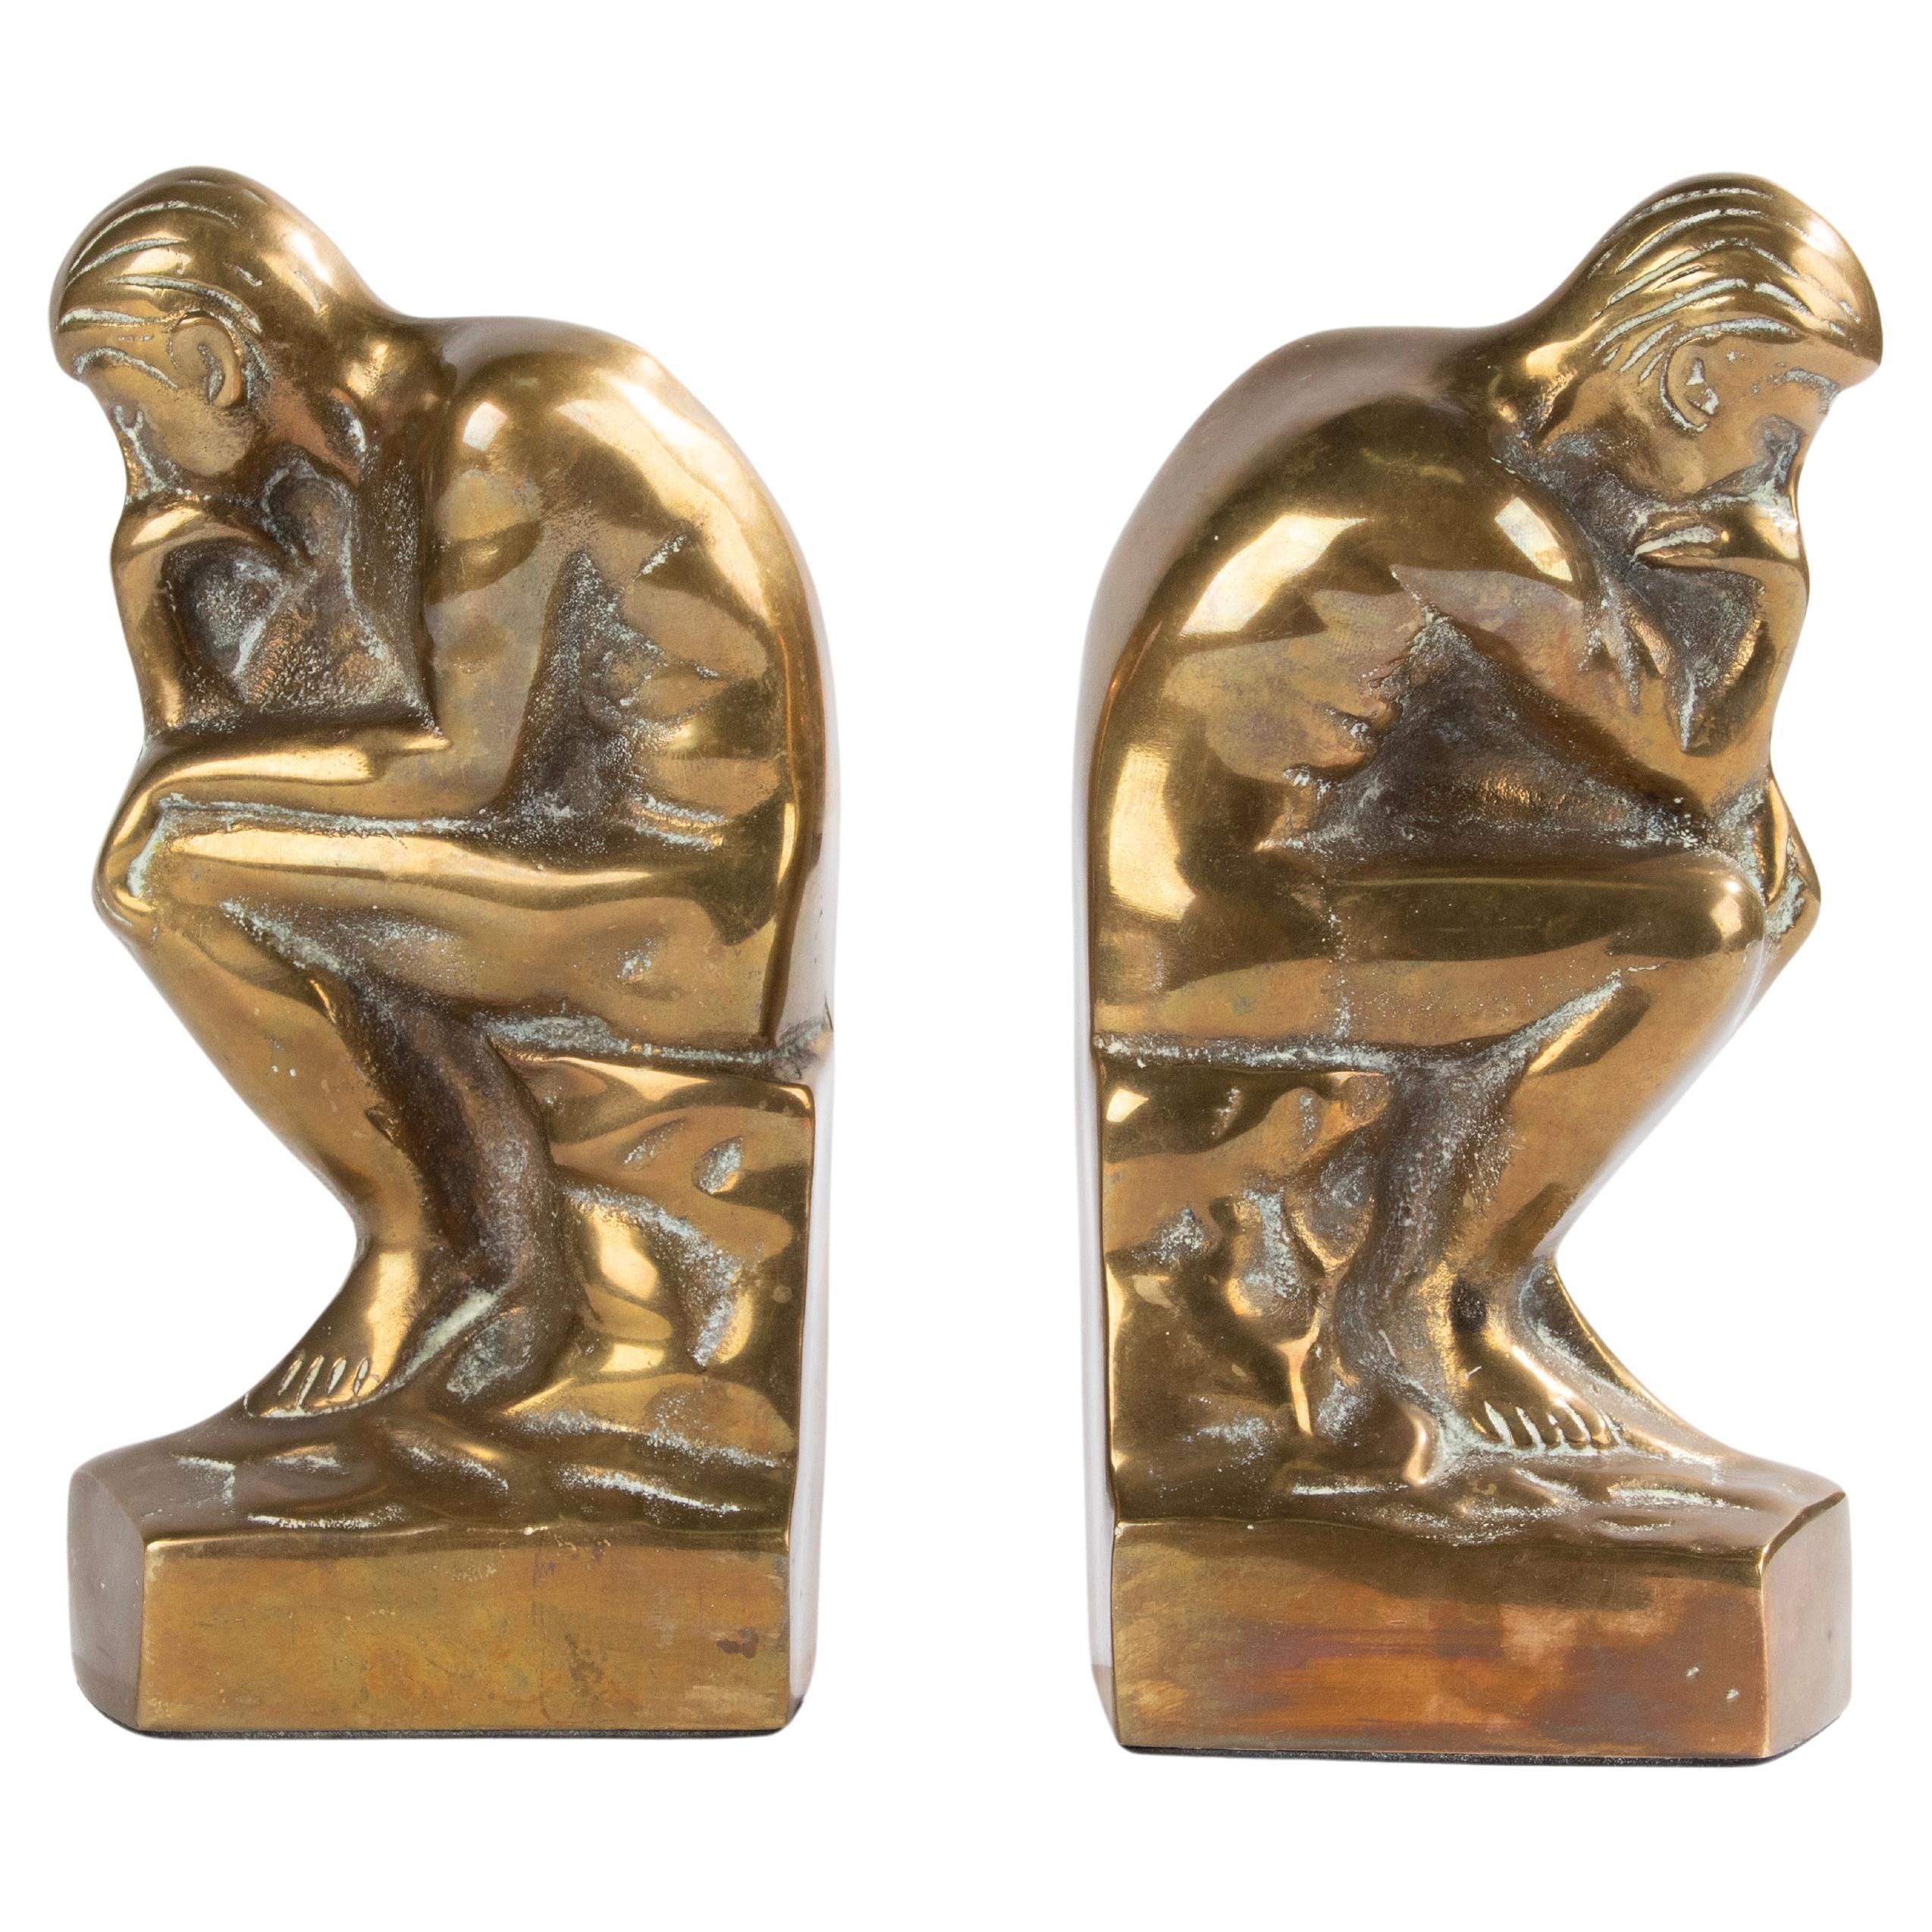 Mid-20th Century Brass Bookends Inspired by 'the Thinker' from Auguste Rodin